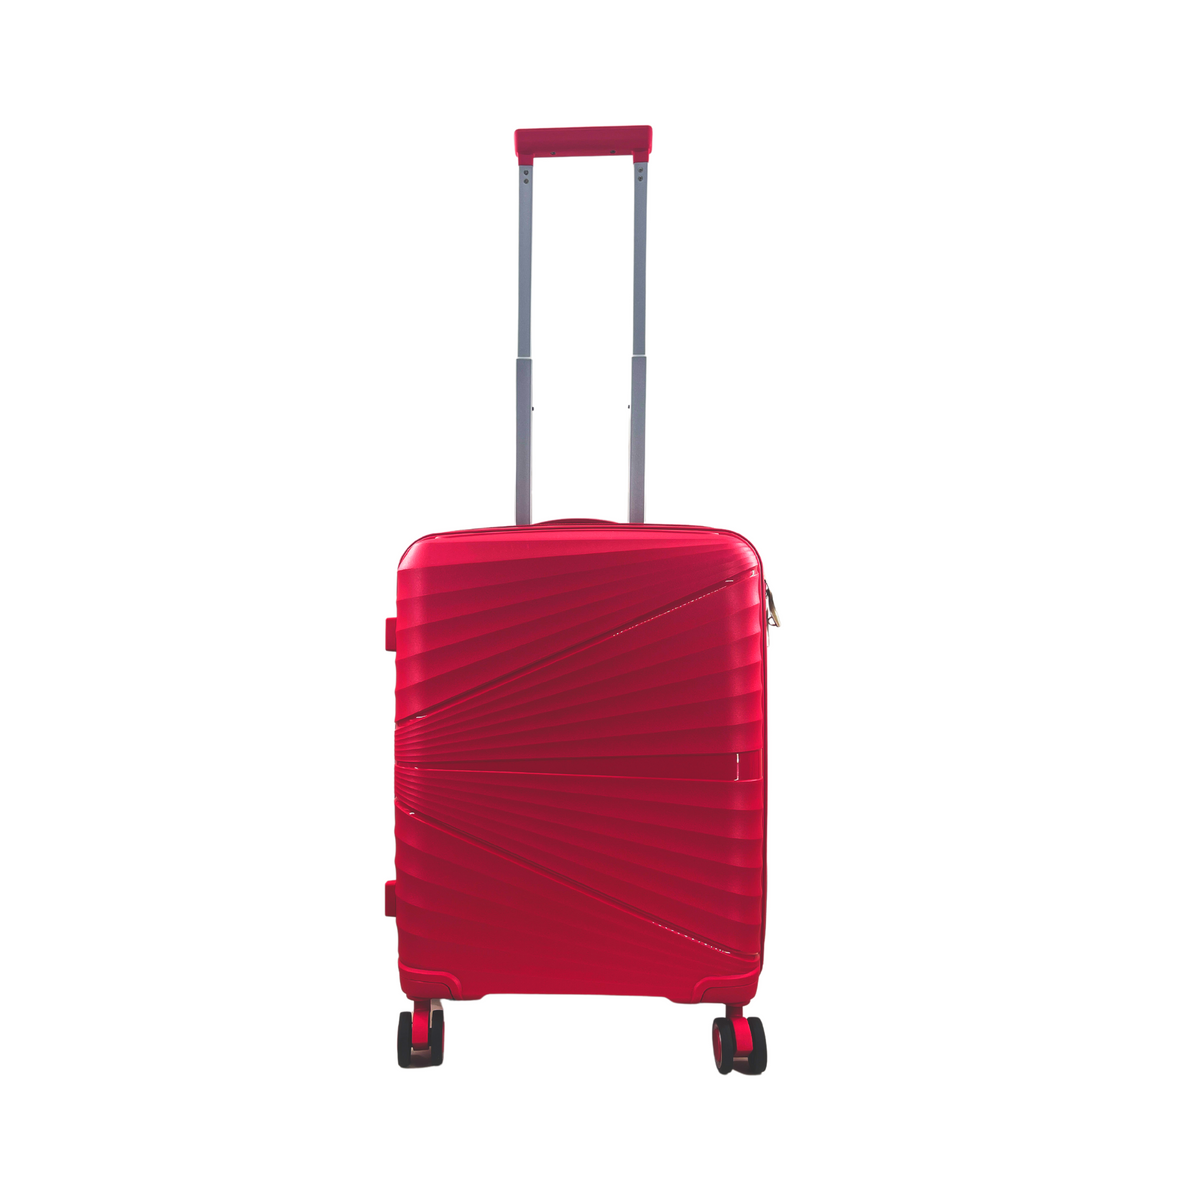 Hand luggage in Soft Polypropylene Light 55x40x25cm With Luck Tsa Small Summer Trolley High quality light quality